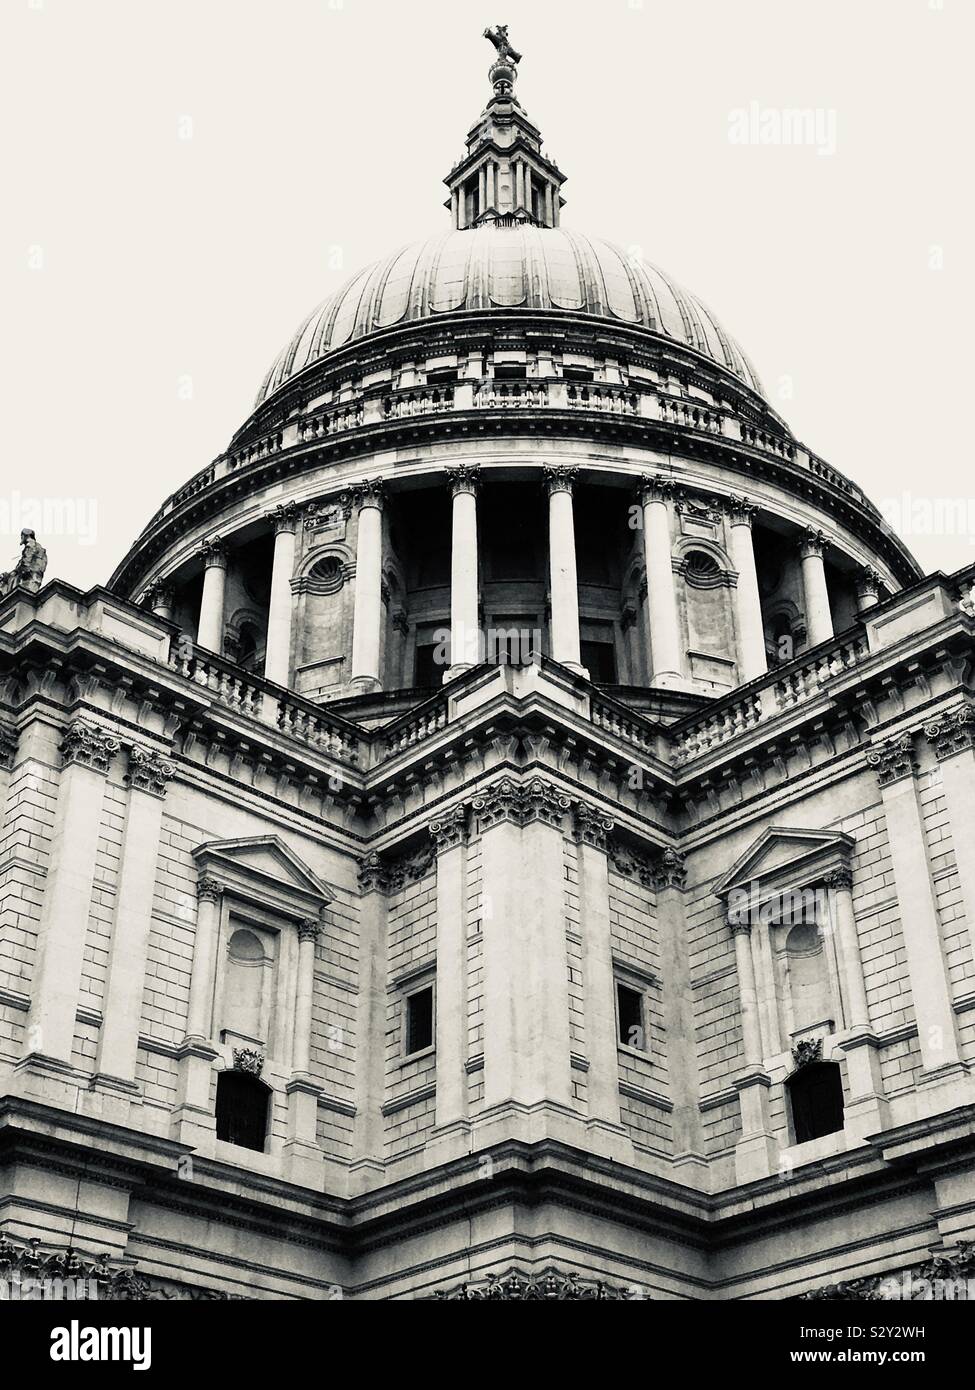 The Dome of St Paul’s Cathedral, London: 2019 Stock Photo